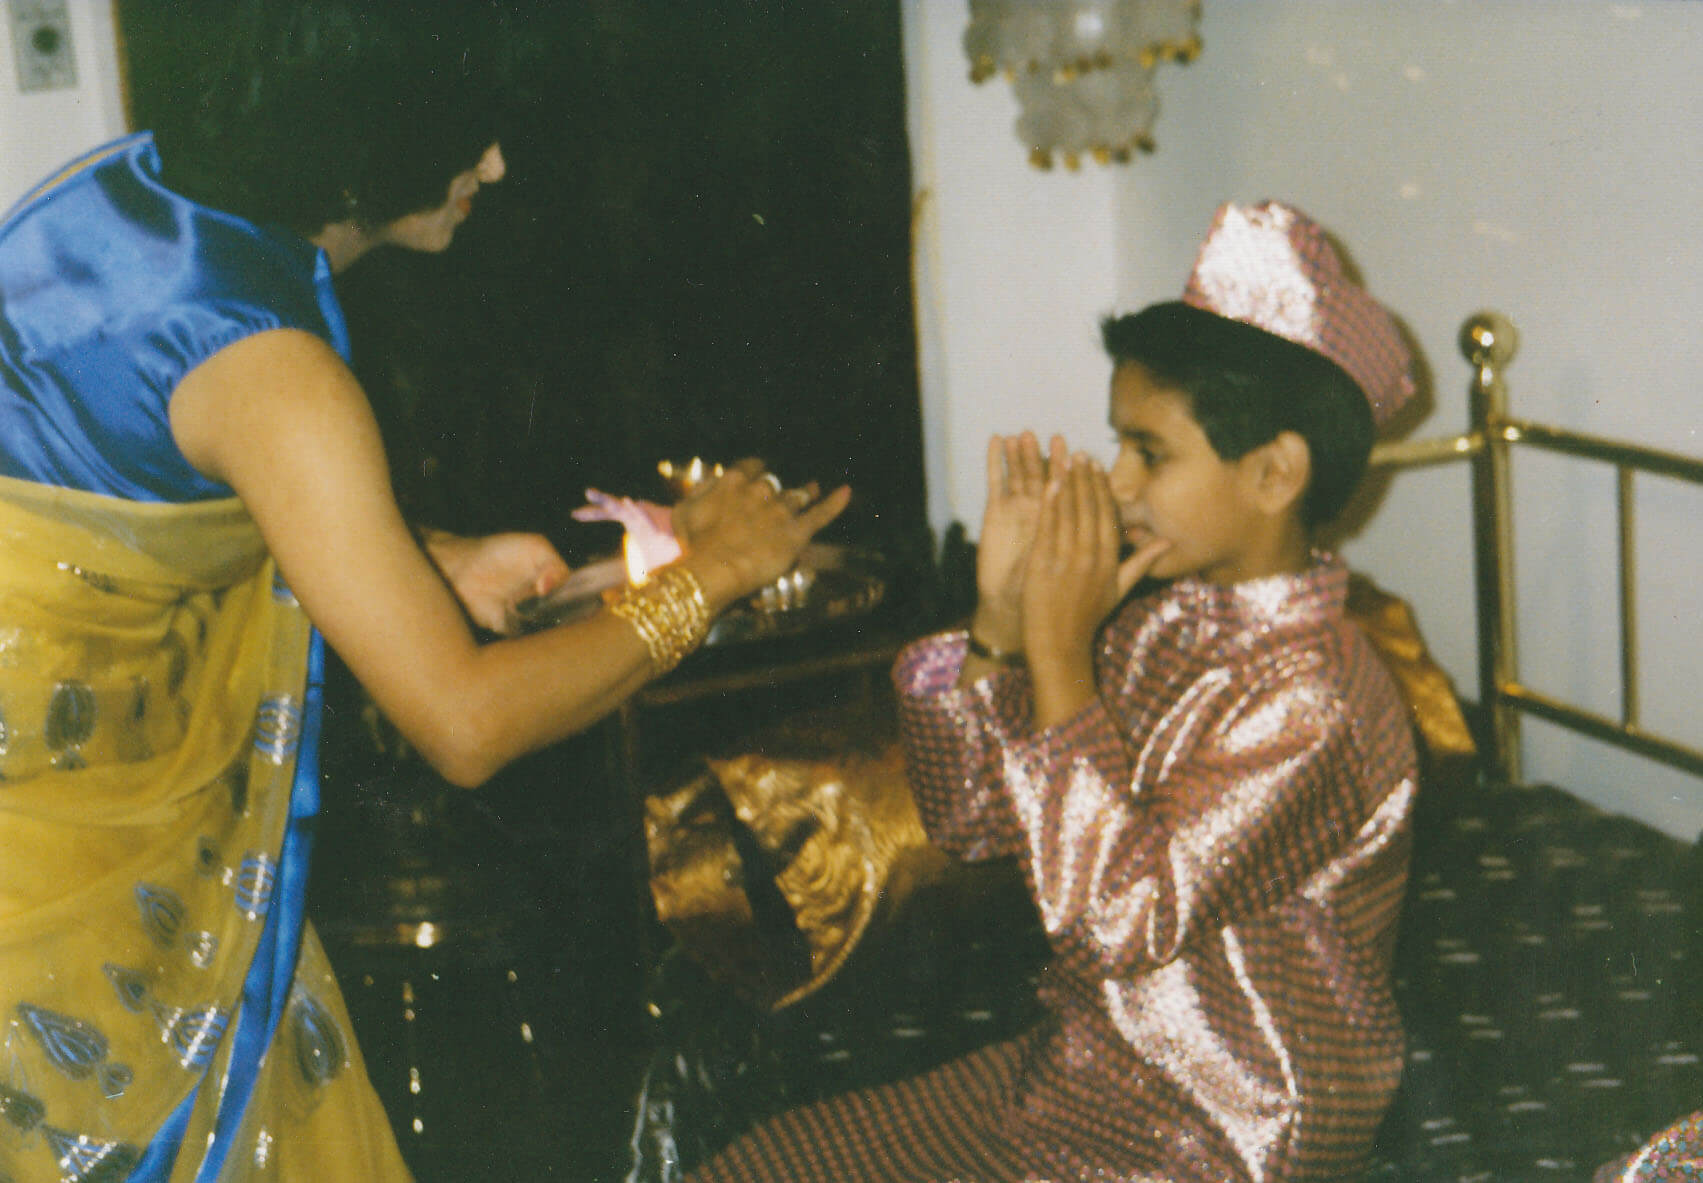 A young Vivek sits in a festive pink outfit, hands raised to her face, while her mother, in a blue and yellow sari, leans towards her with a lit lamp.